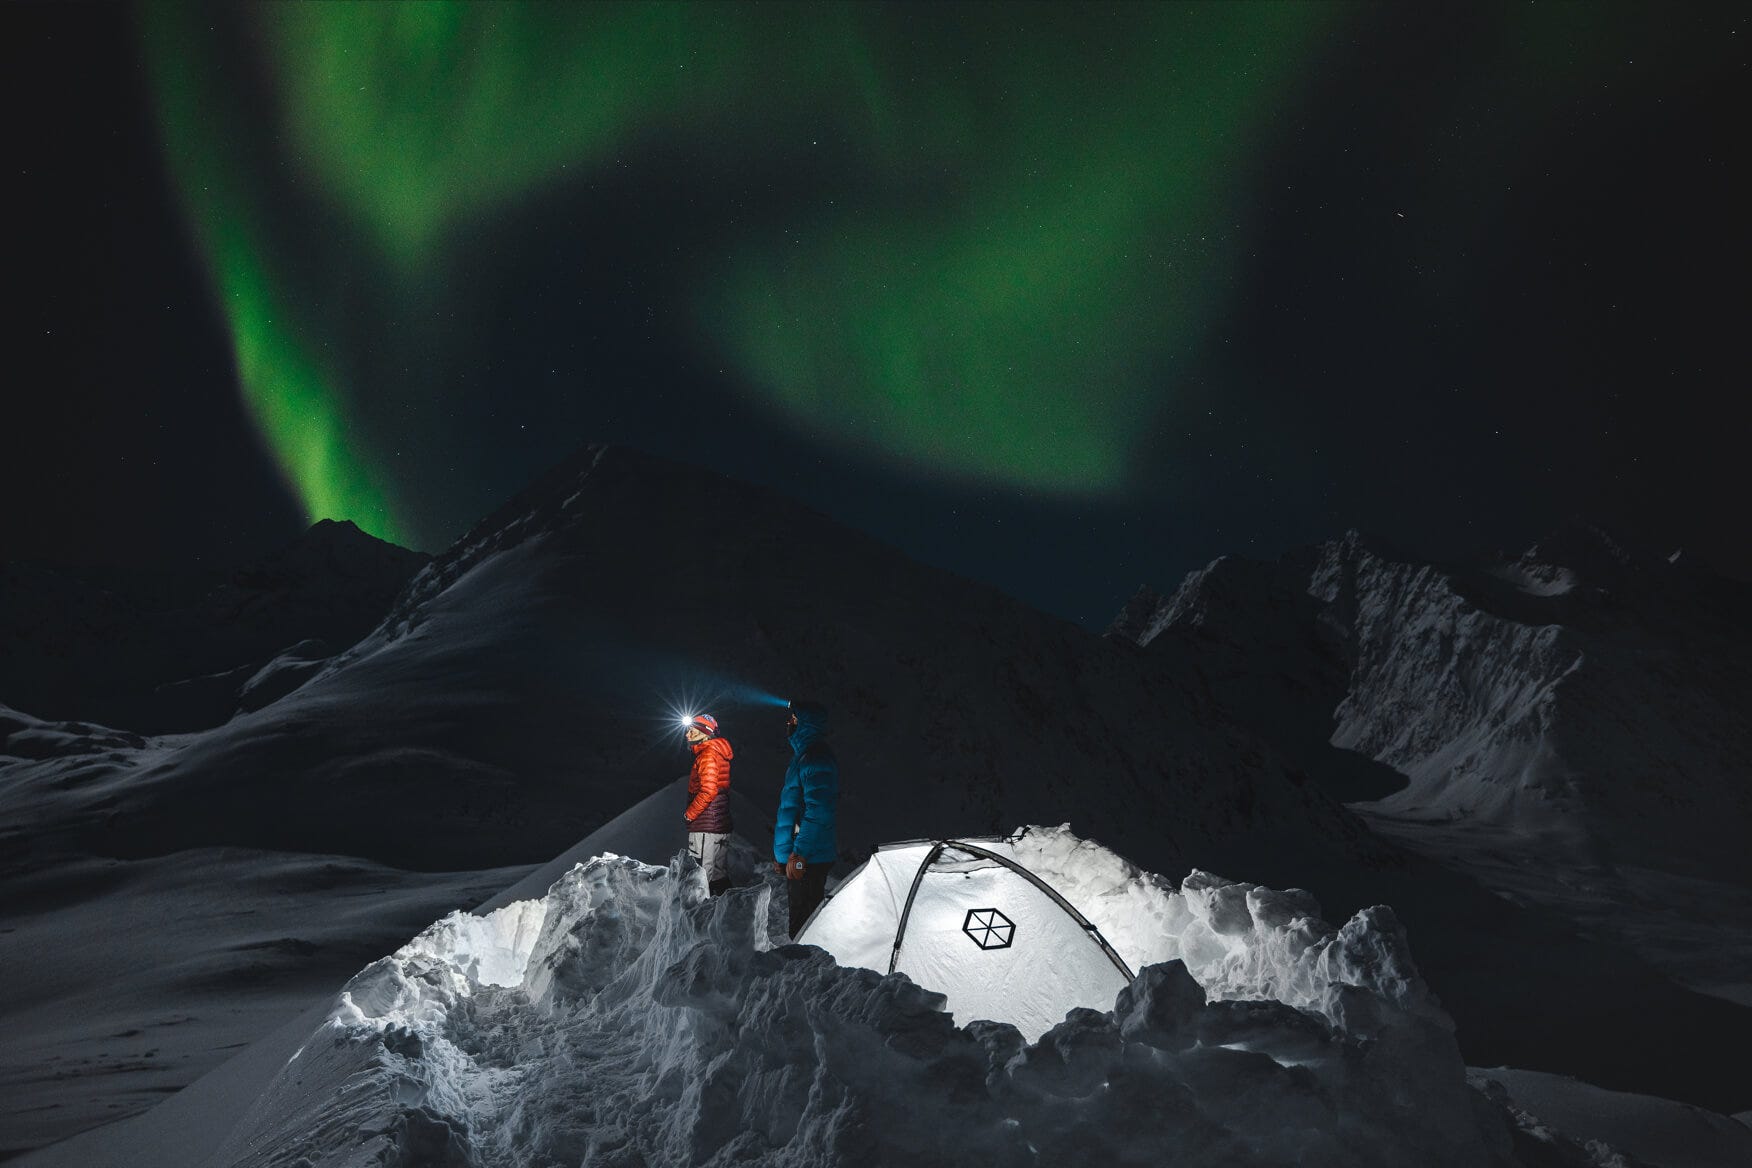 2 people with headlamps on standing next to a tent under the northern nights 